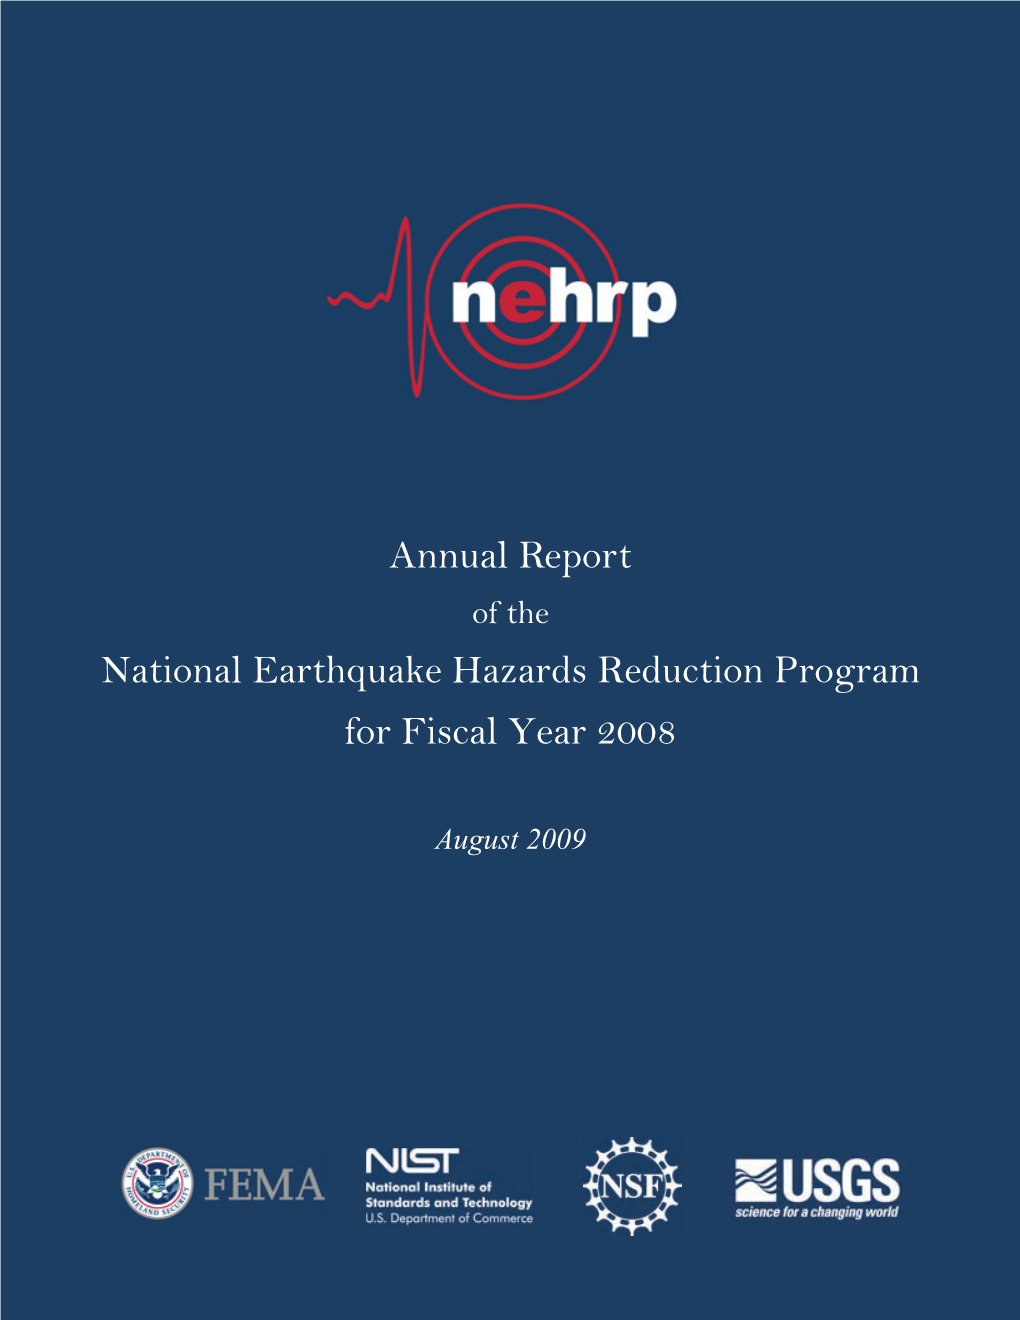 Annual Report of the National Earthquake Hazards Reduction Program for Fiscal Year 2008